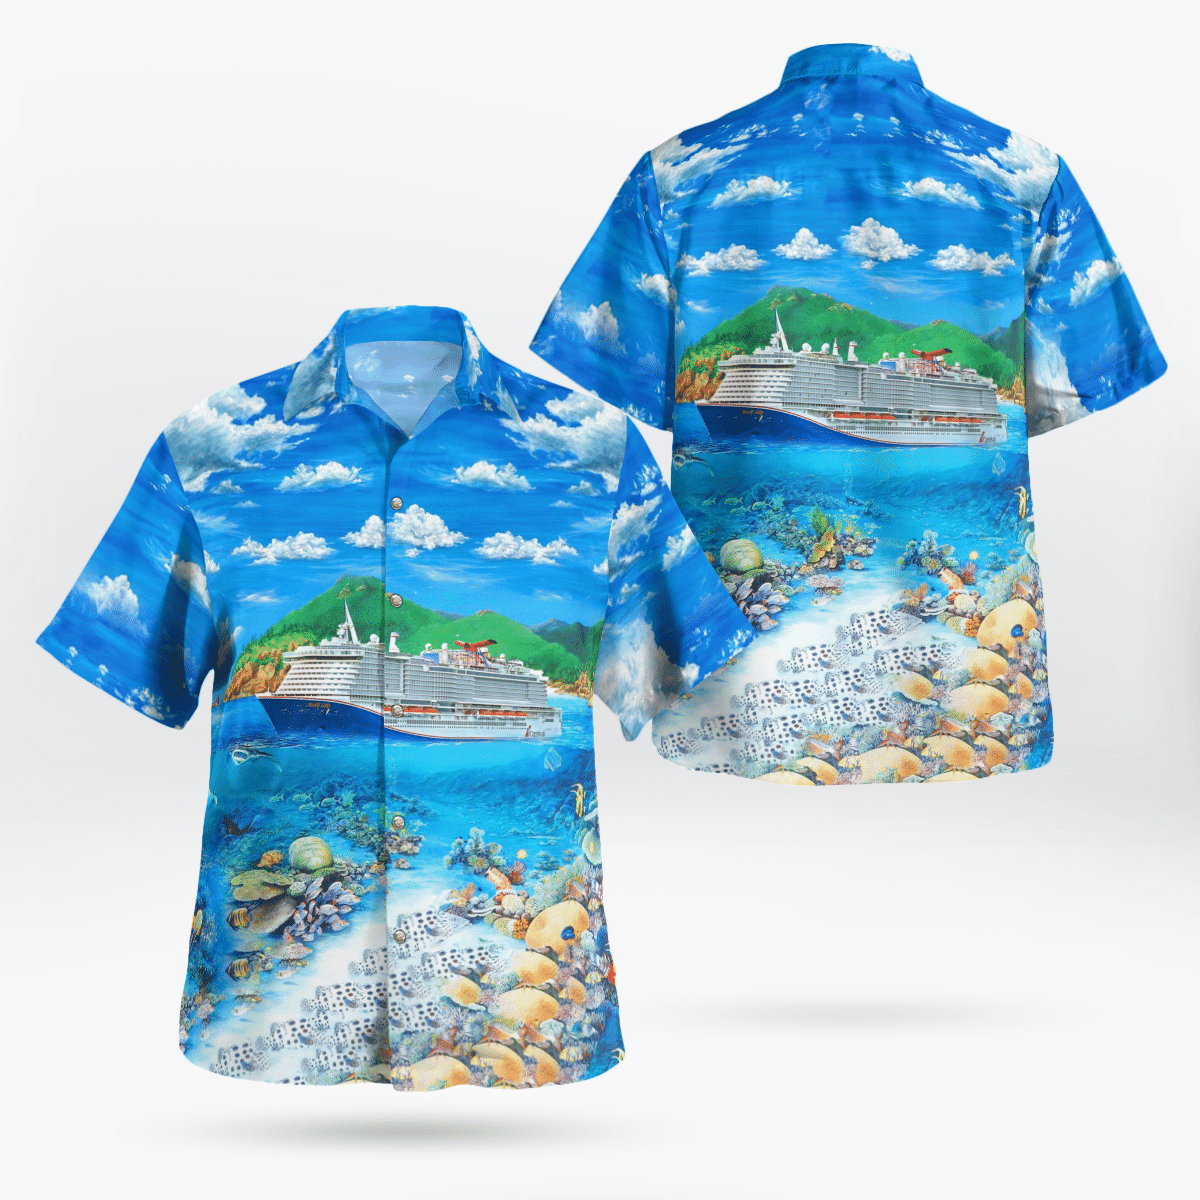 Consider getting these Hawaiian Shirt for your friends 253